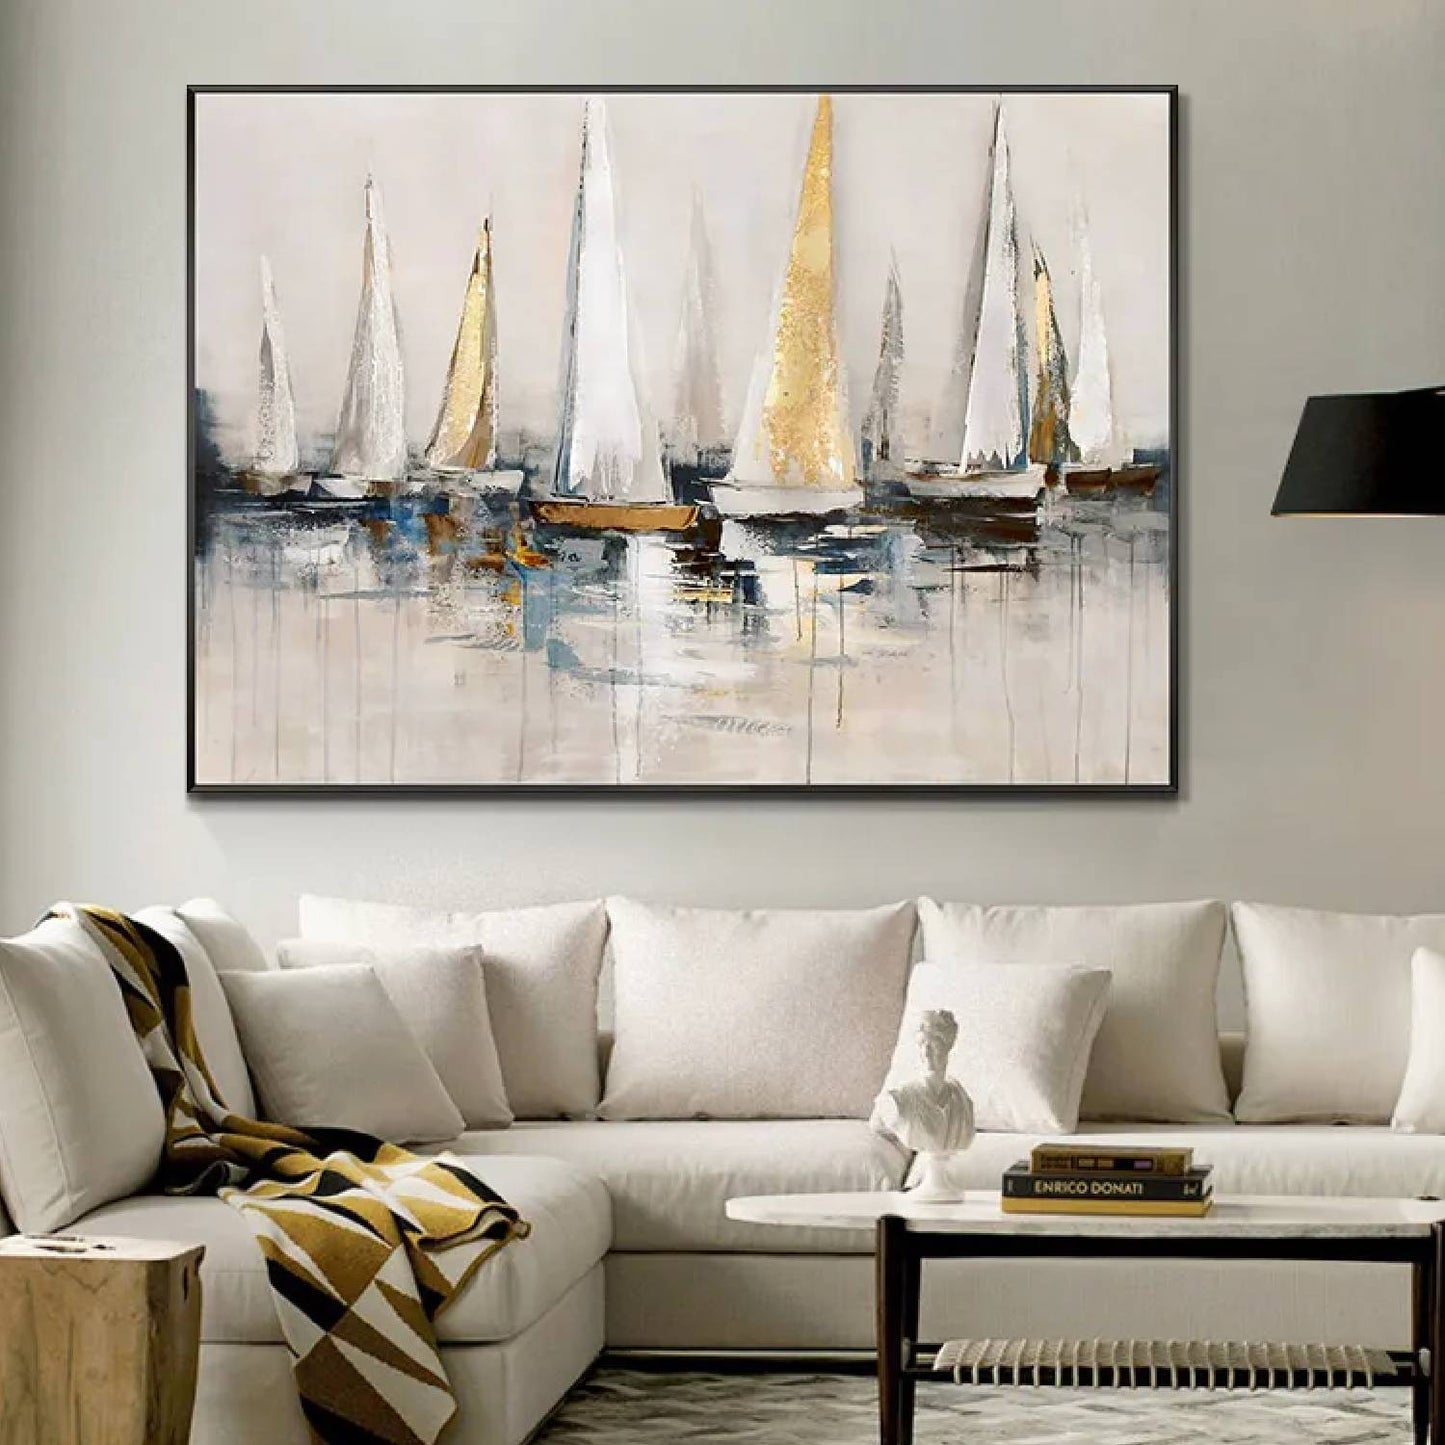 Sea Sailing Boats Drippy Texture Seascape Painting